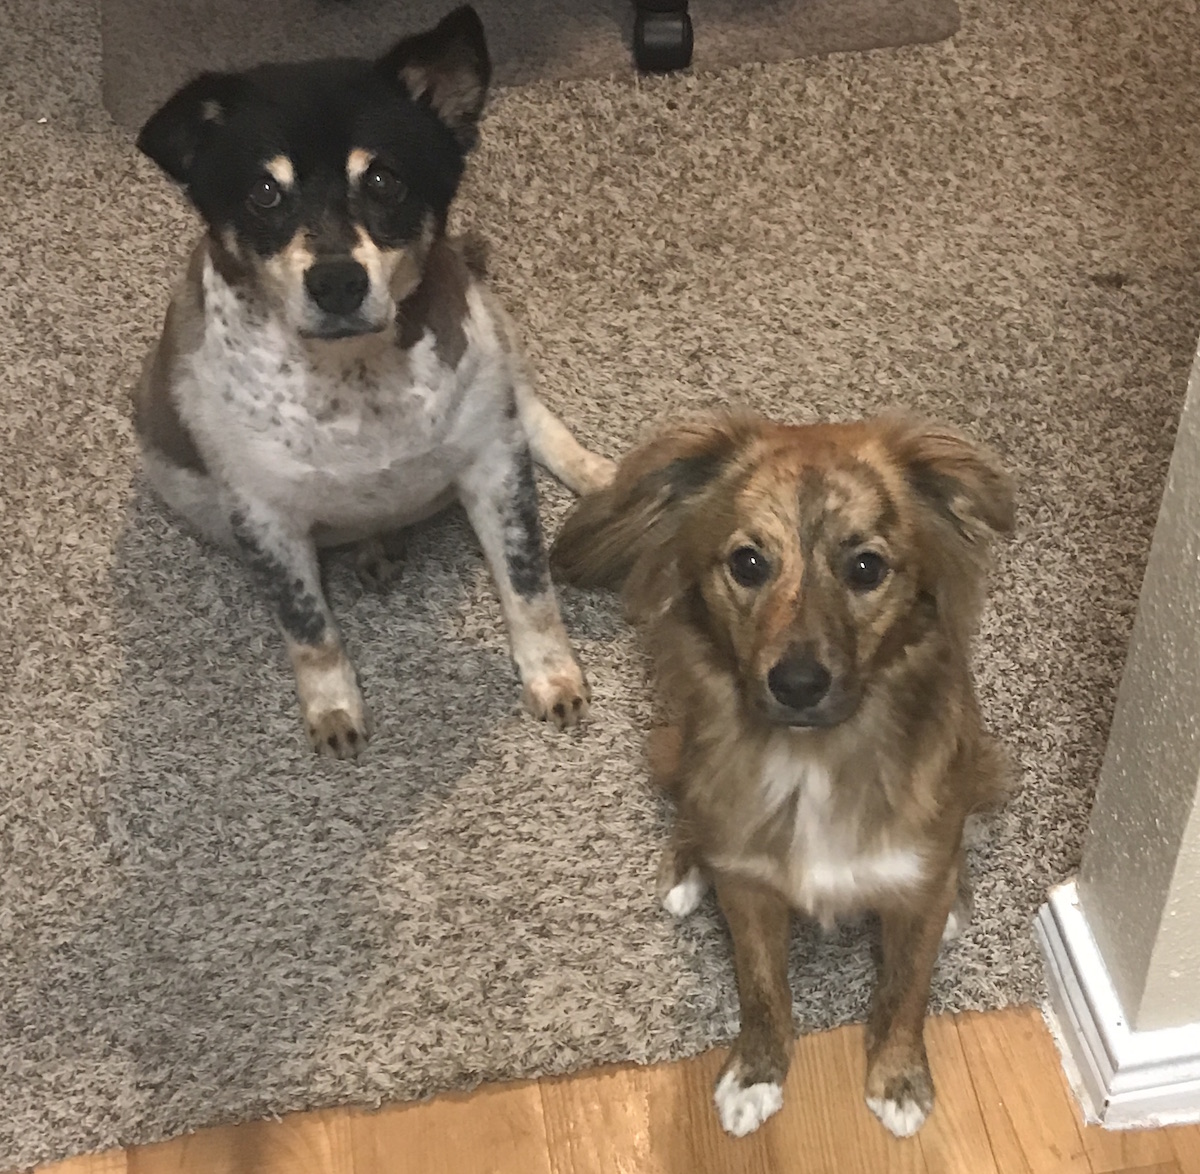 PHOTO: Sam (left) and Artemis (right) take shelter in The Signal reporter, Sarah King's apartment during Hurricane Harvey. Photo by The Signal reporter Sarah King.